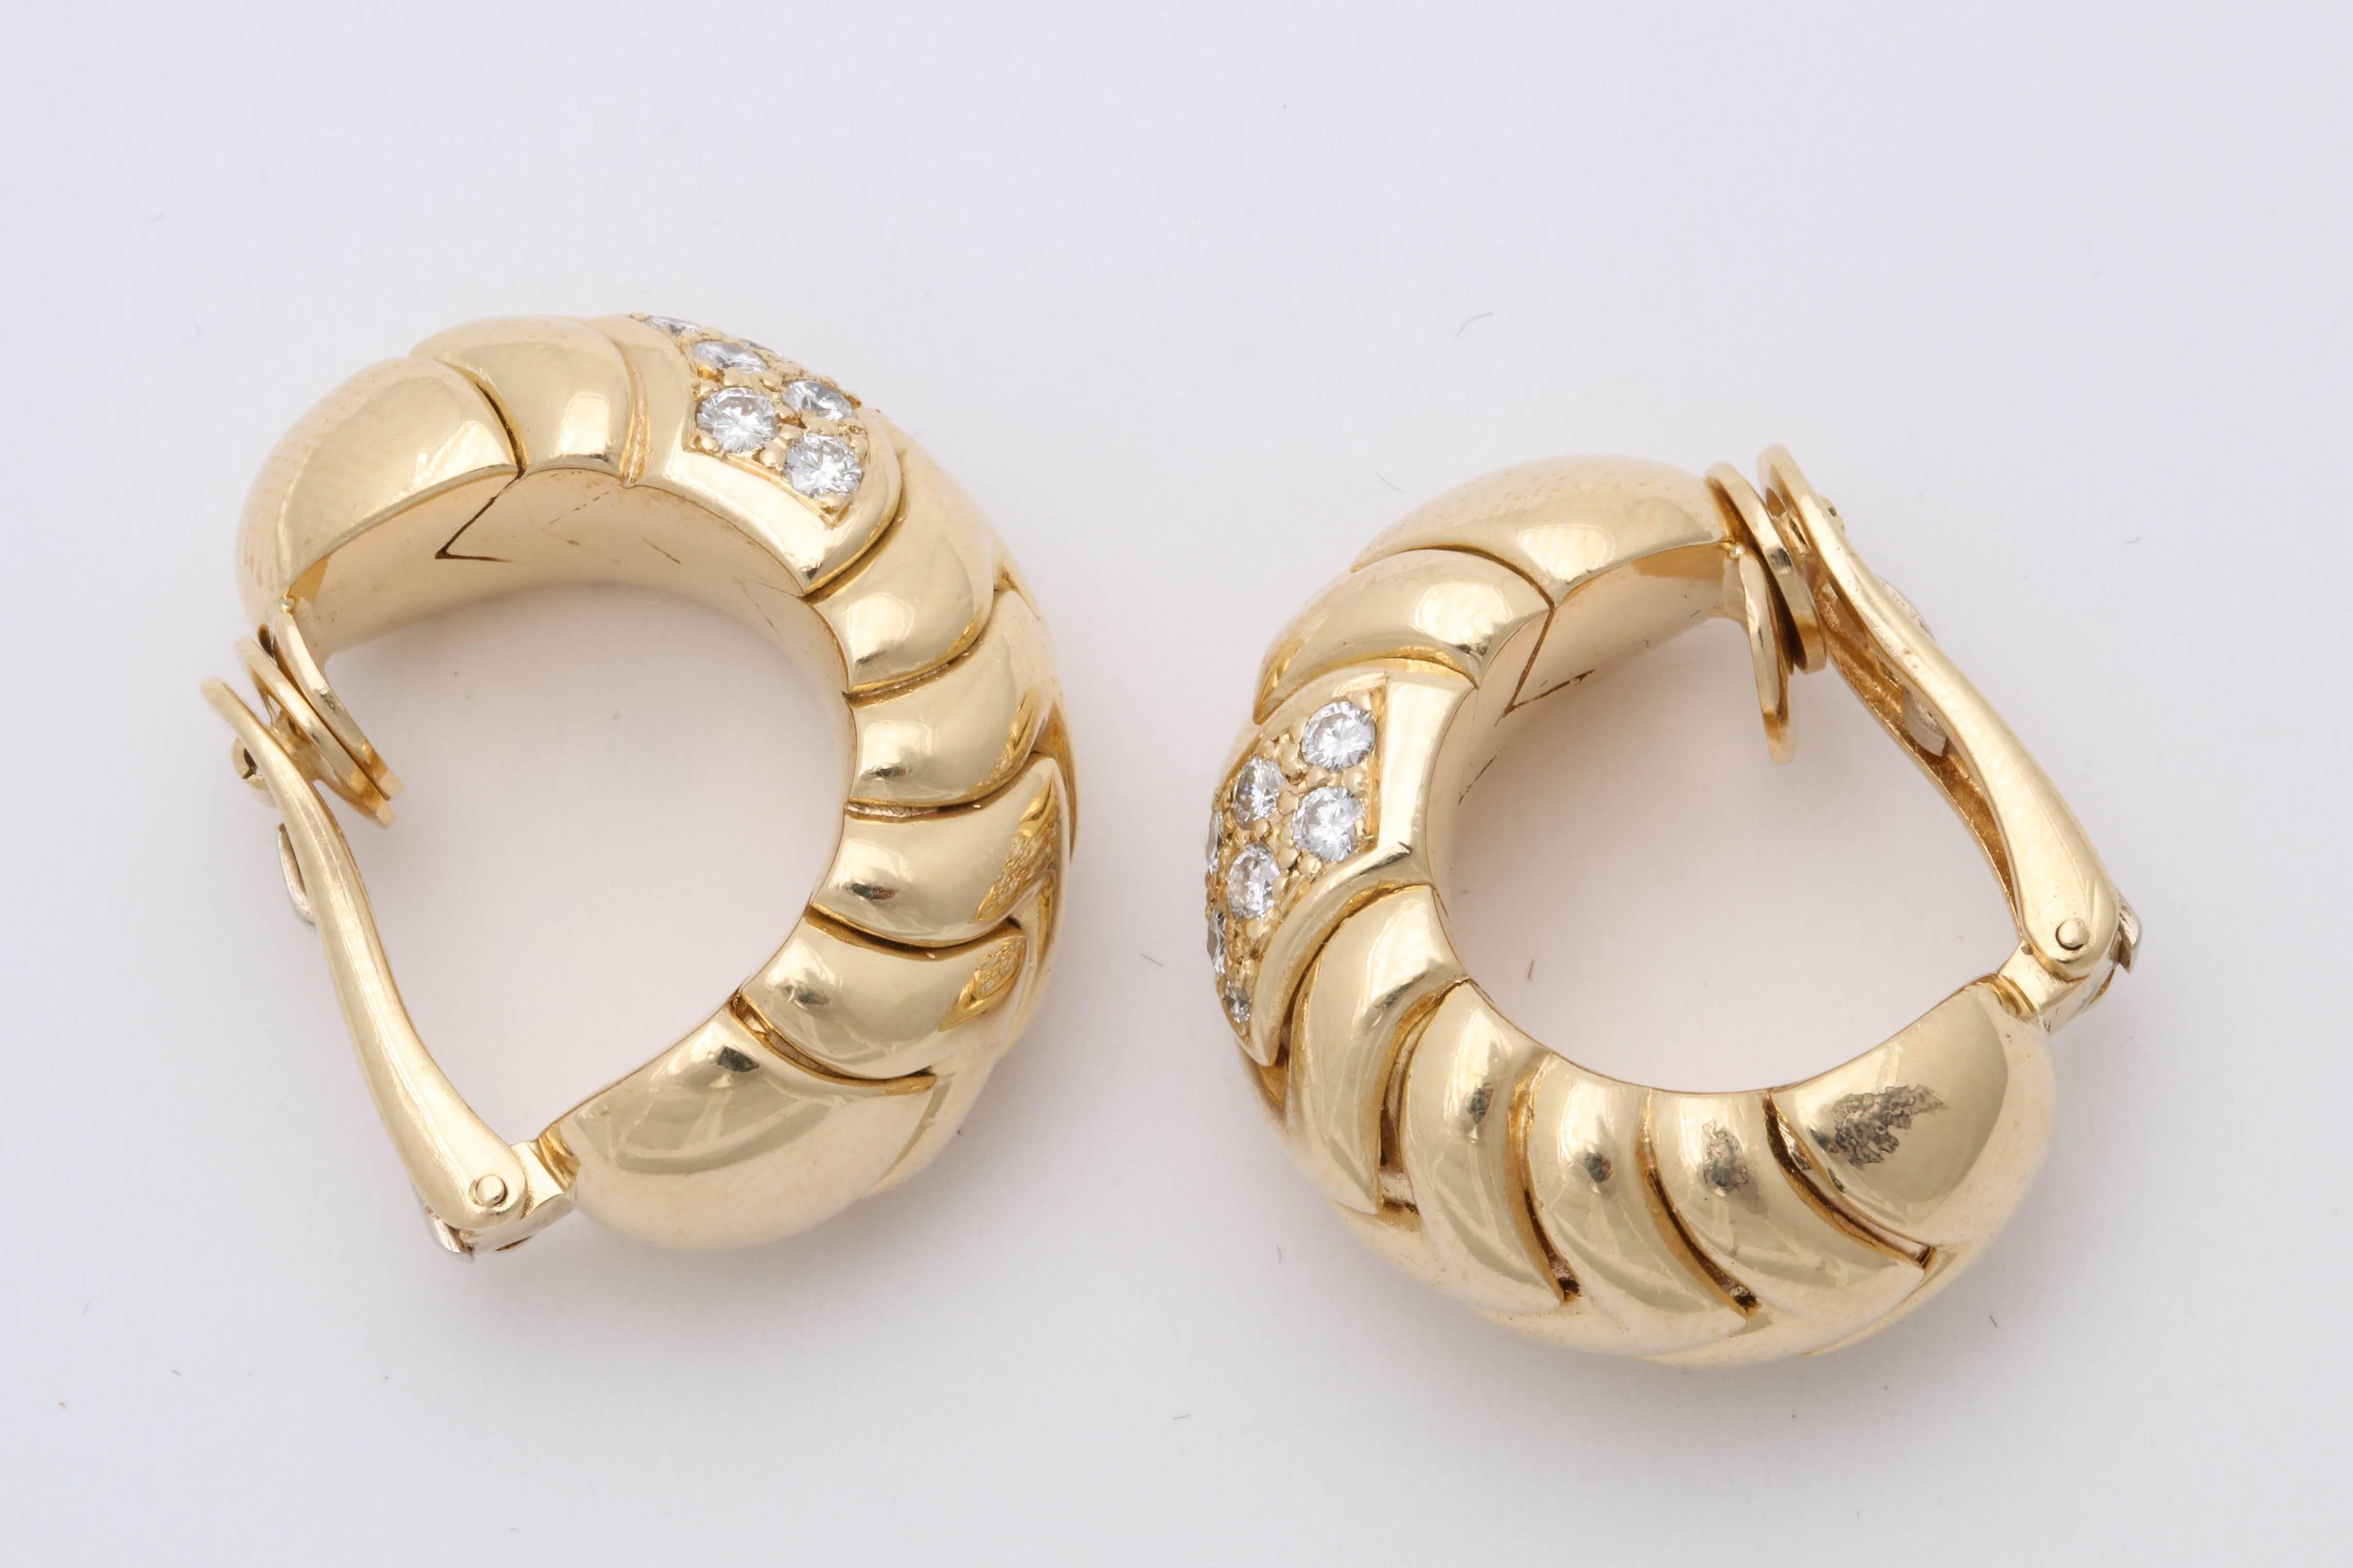 Women's 1980s Half Hoop Design Chevron Style Diamond and Gold Earrings with Clip Backs For Sale